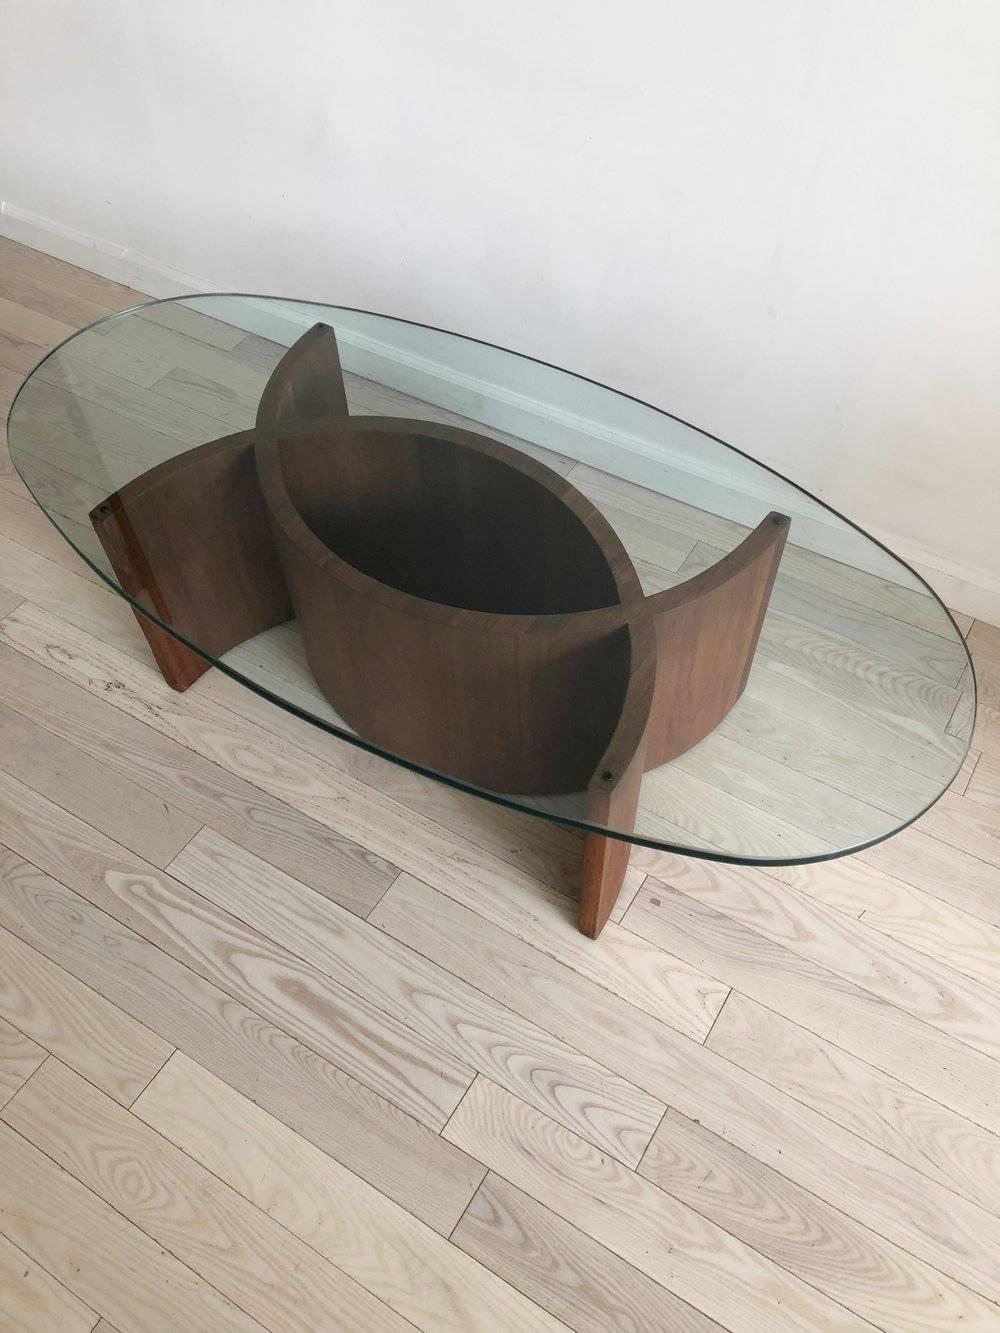 A stunning curvy sculptural walnut based coffee table with glass top. Incredibly clean and sleek. An excellent addition to your modern or eclectic home. One small chip in glass, and a few nicks in walnut base, as pictured.

Measures: 25.25